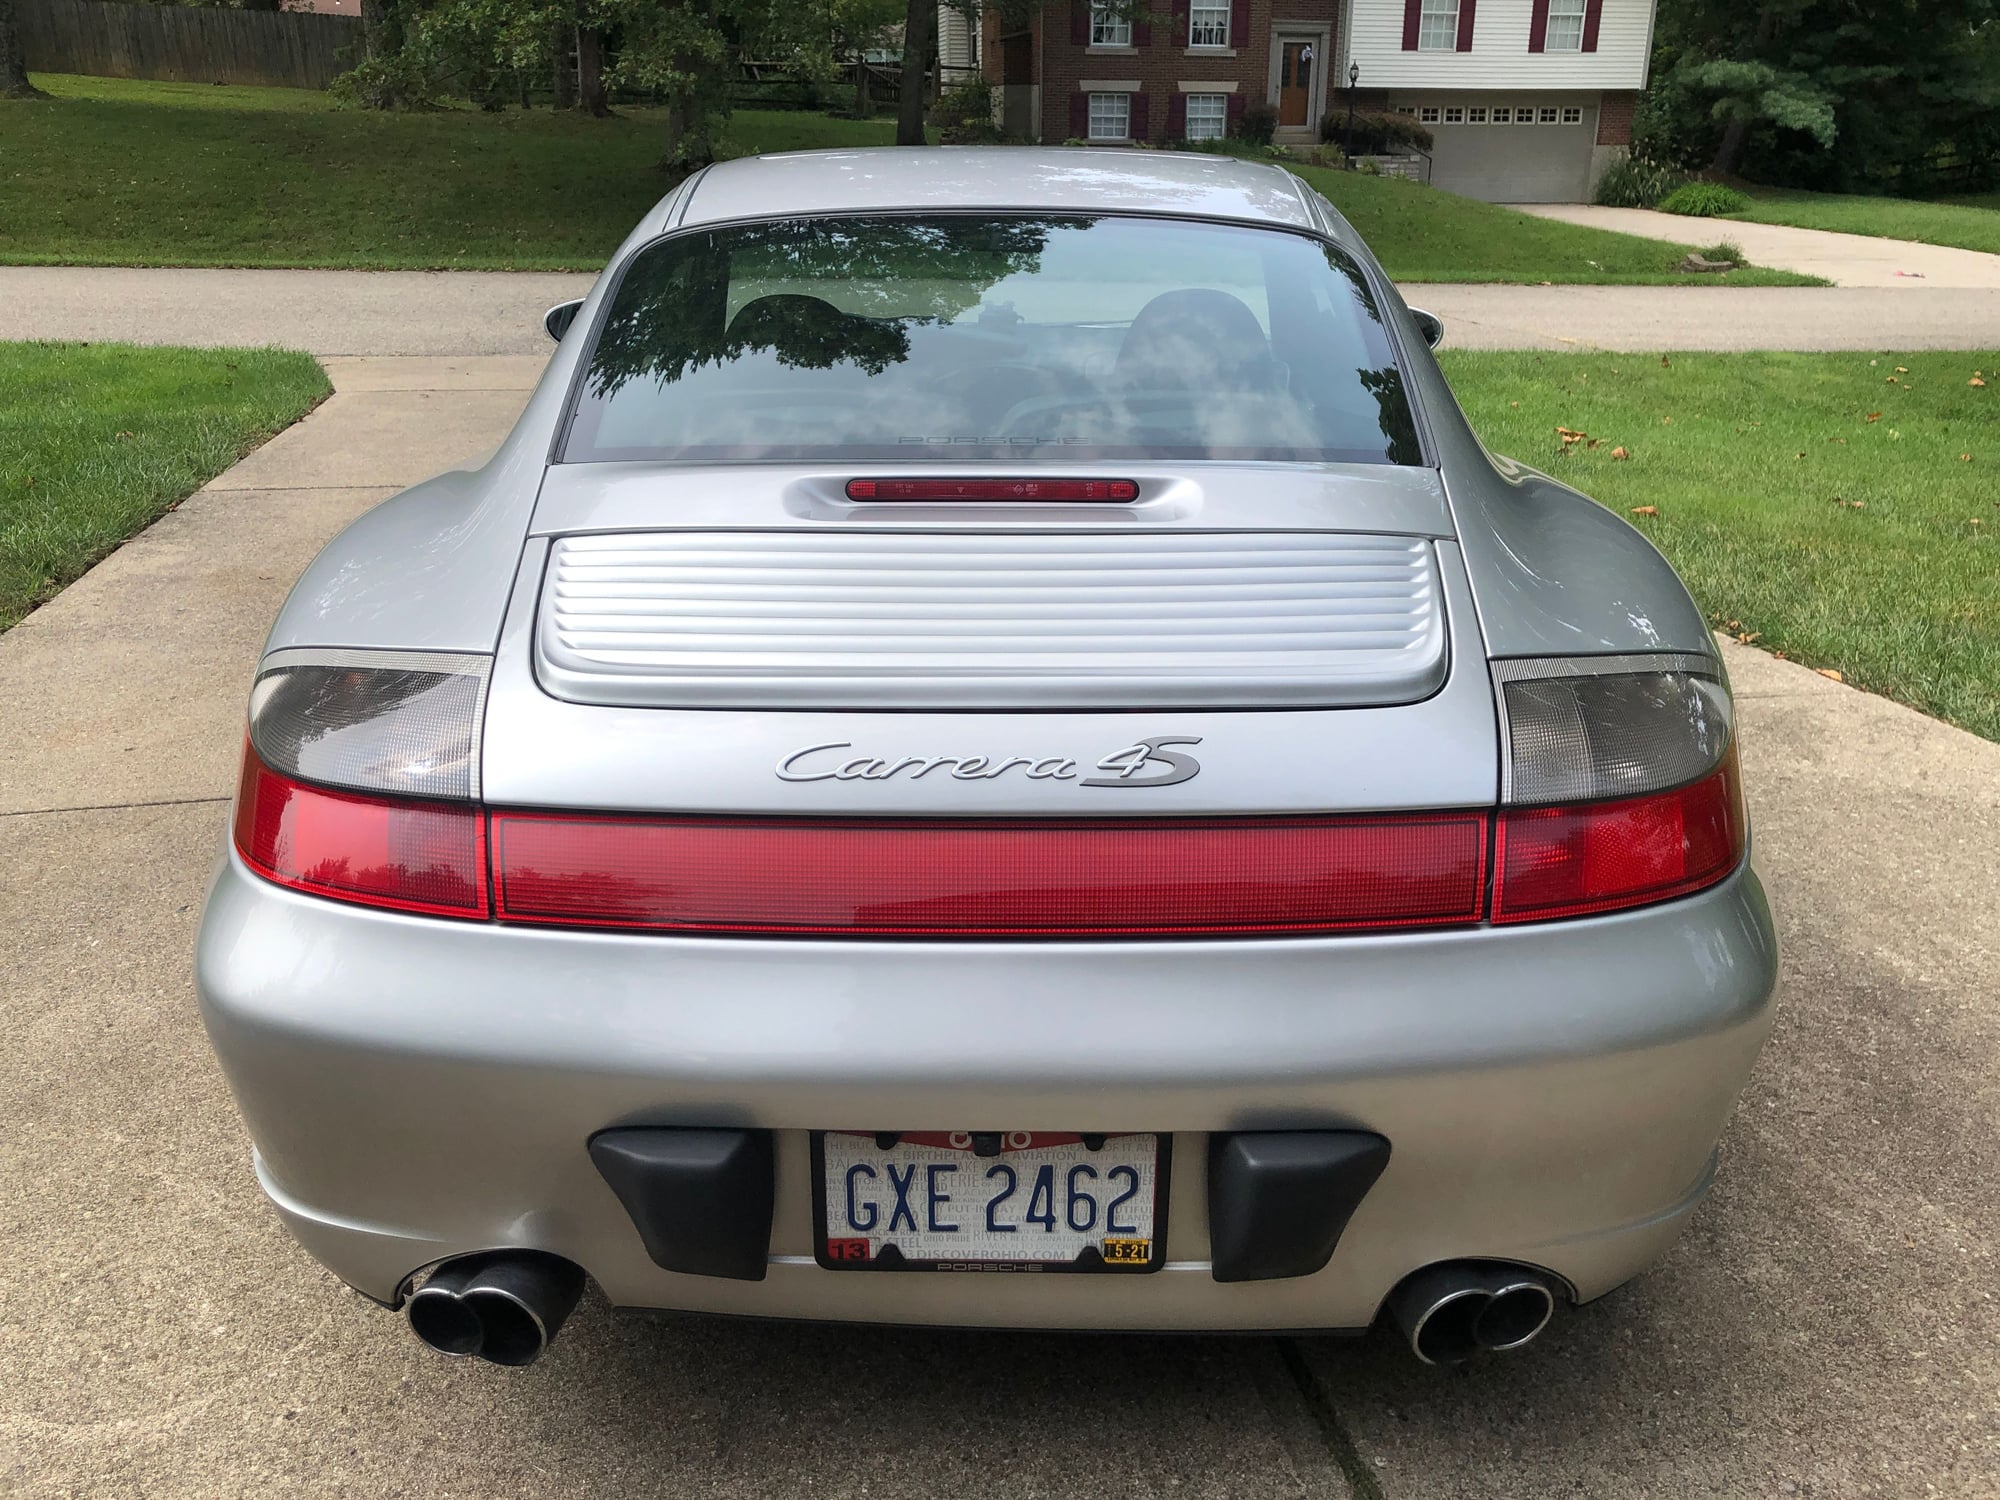 2003 Porsche 911 - Beautiful 2003 Porsche 911 Carrera 4S (6 speed, super clean) - Used - VIN WP0AA29993S623883 - 118,000 Miles - 6 cyl - AWD - Manual - Coupe - Silver - Cincinnati, OH 45245, United States